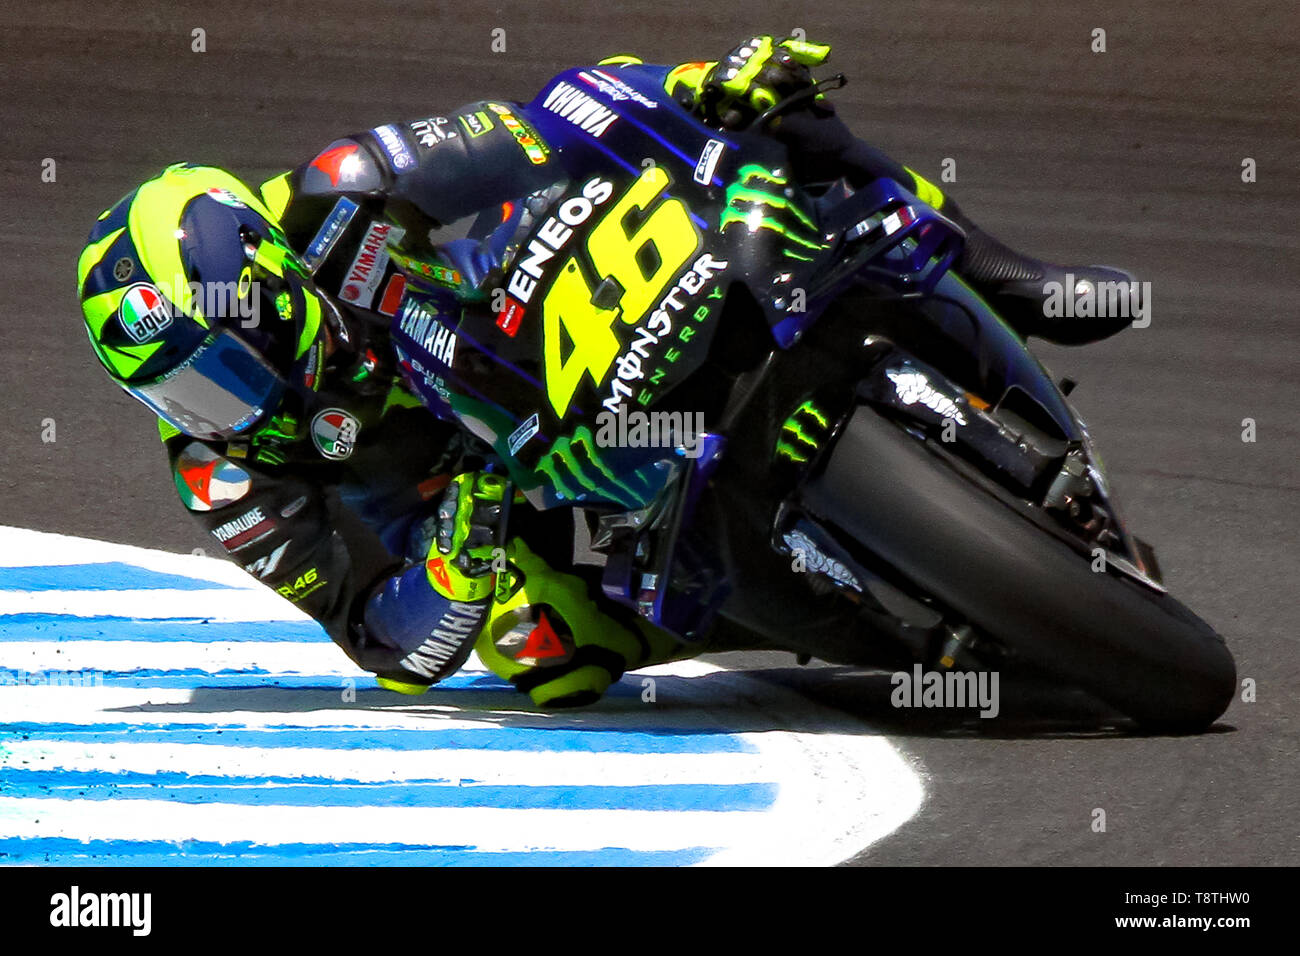 46 Valentino Rossi High Resolution Stock Photography and Images - Alamy